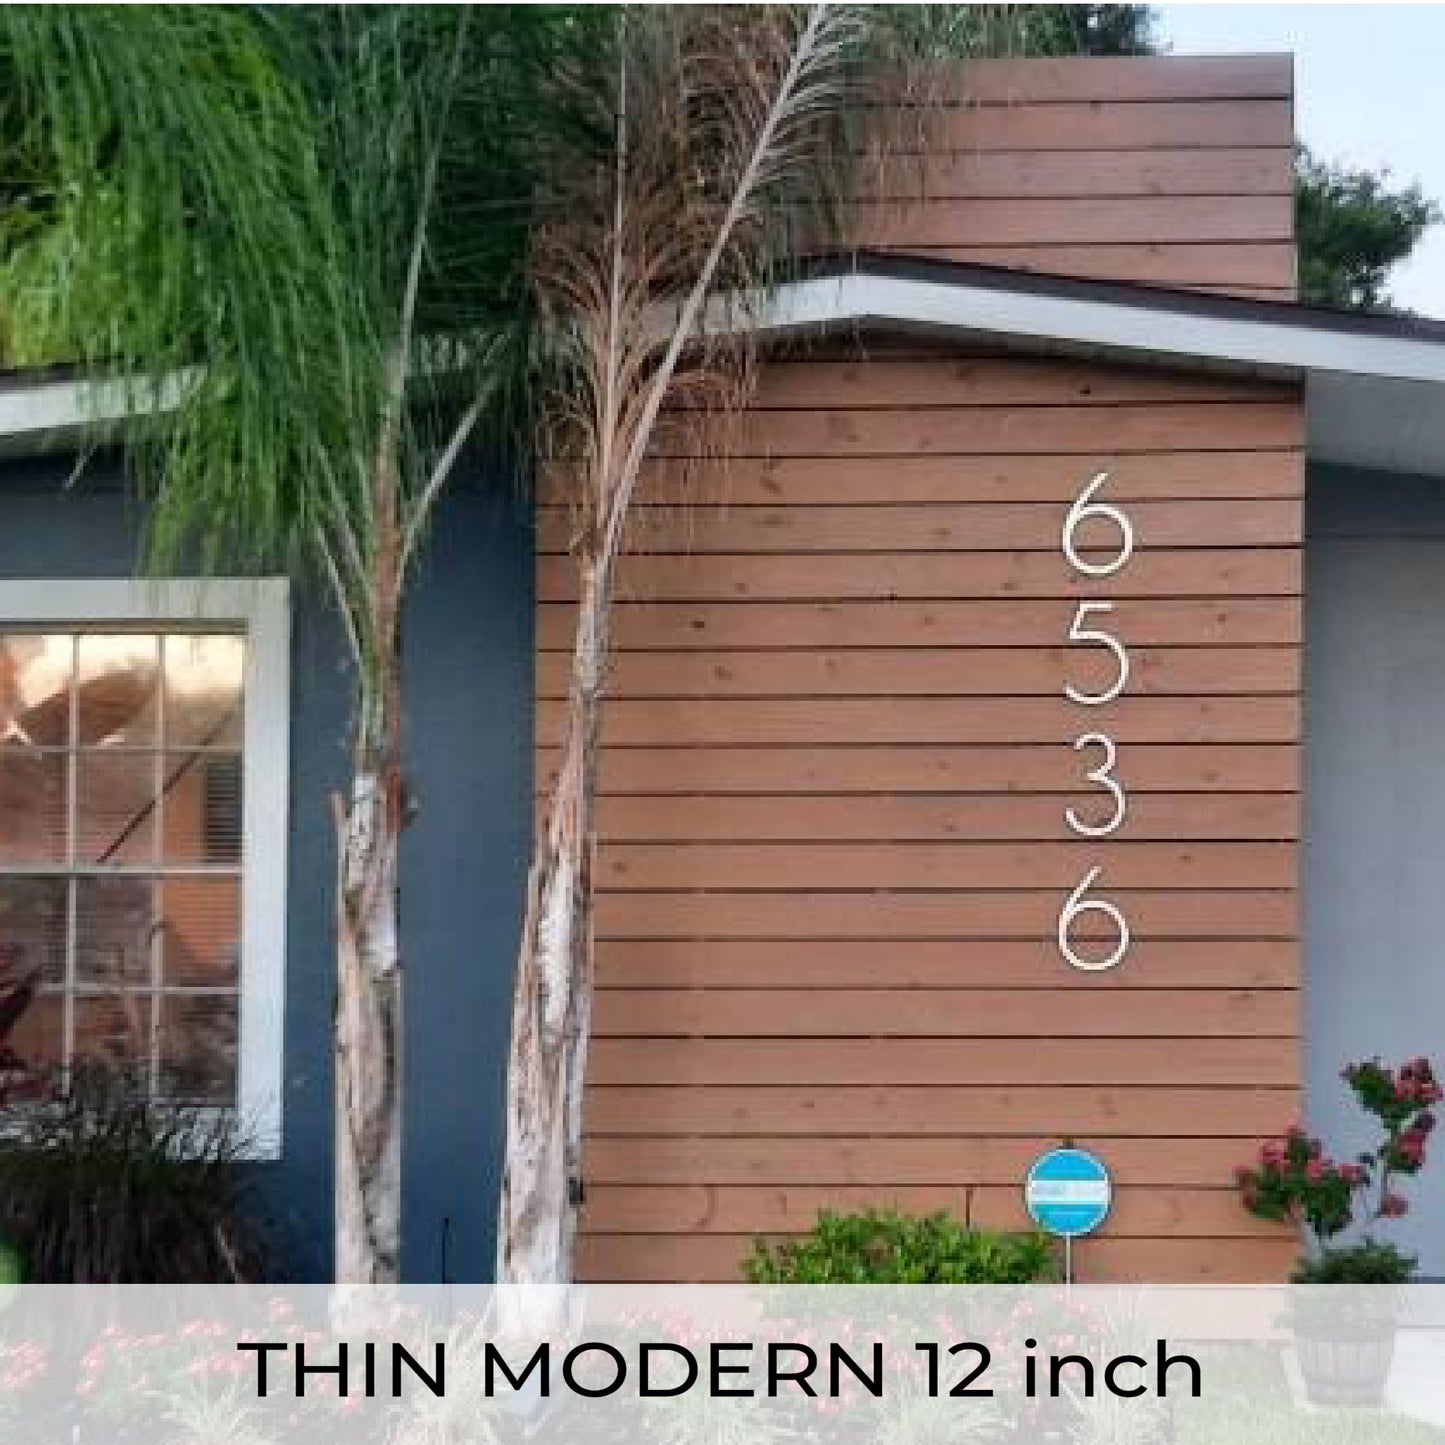 THIN MODERN house numbers and letters